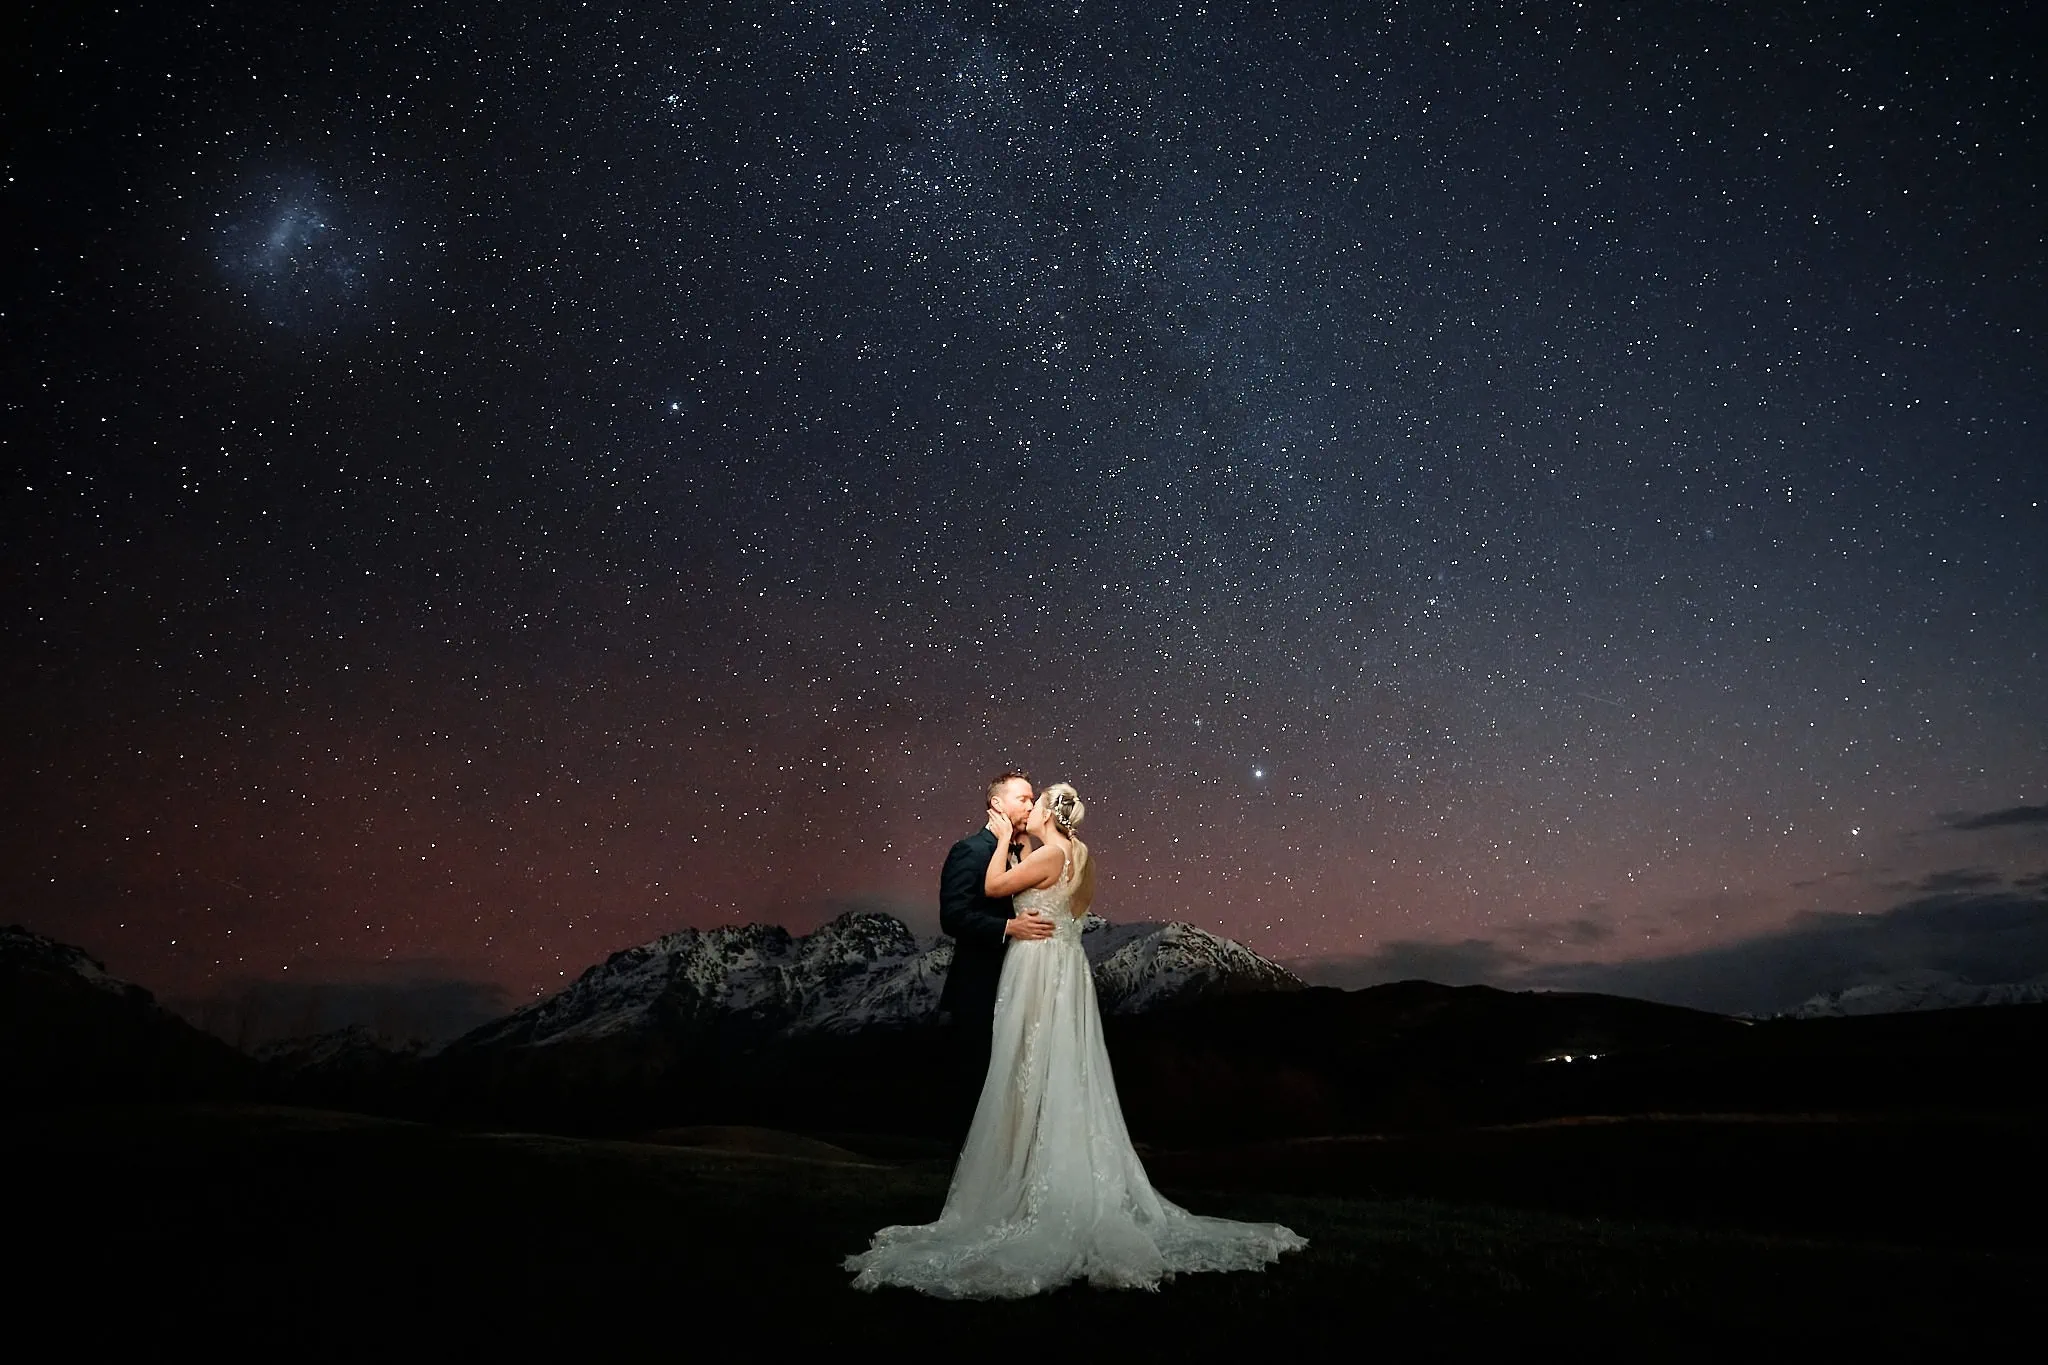 Queenstown New Zealand Elopement Wedding Photographer - A stunning Starry Night shoot featuring a bride and groom under the starry sky